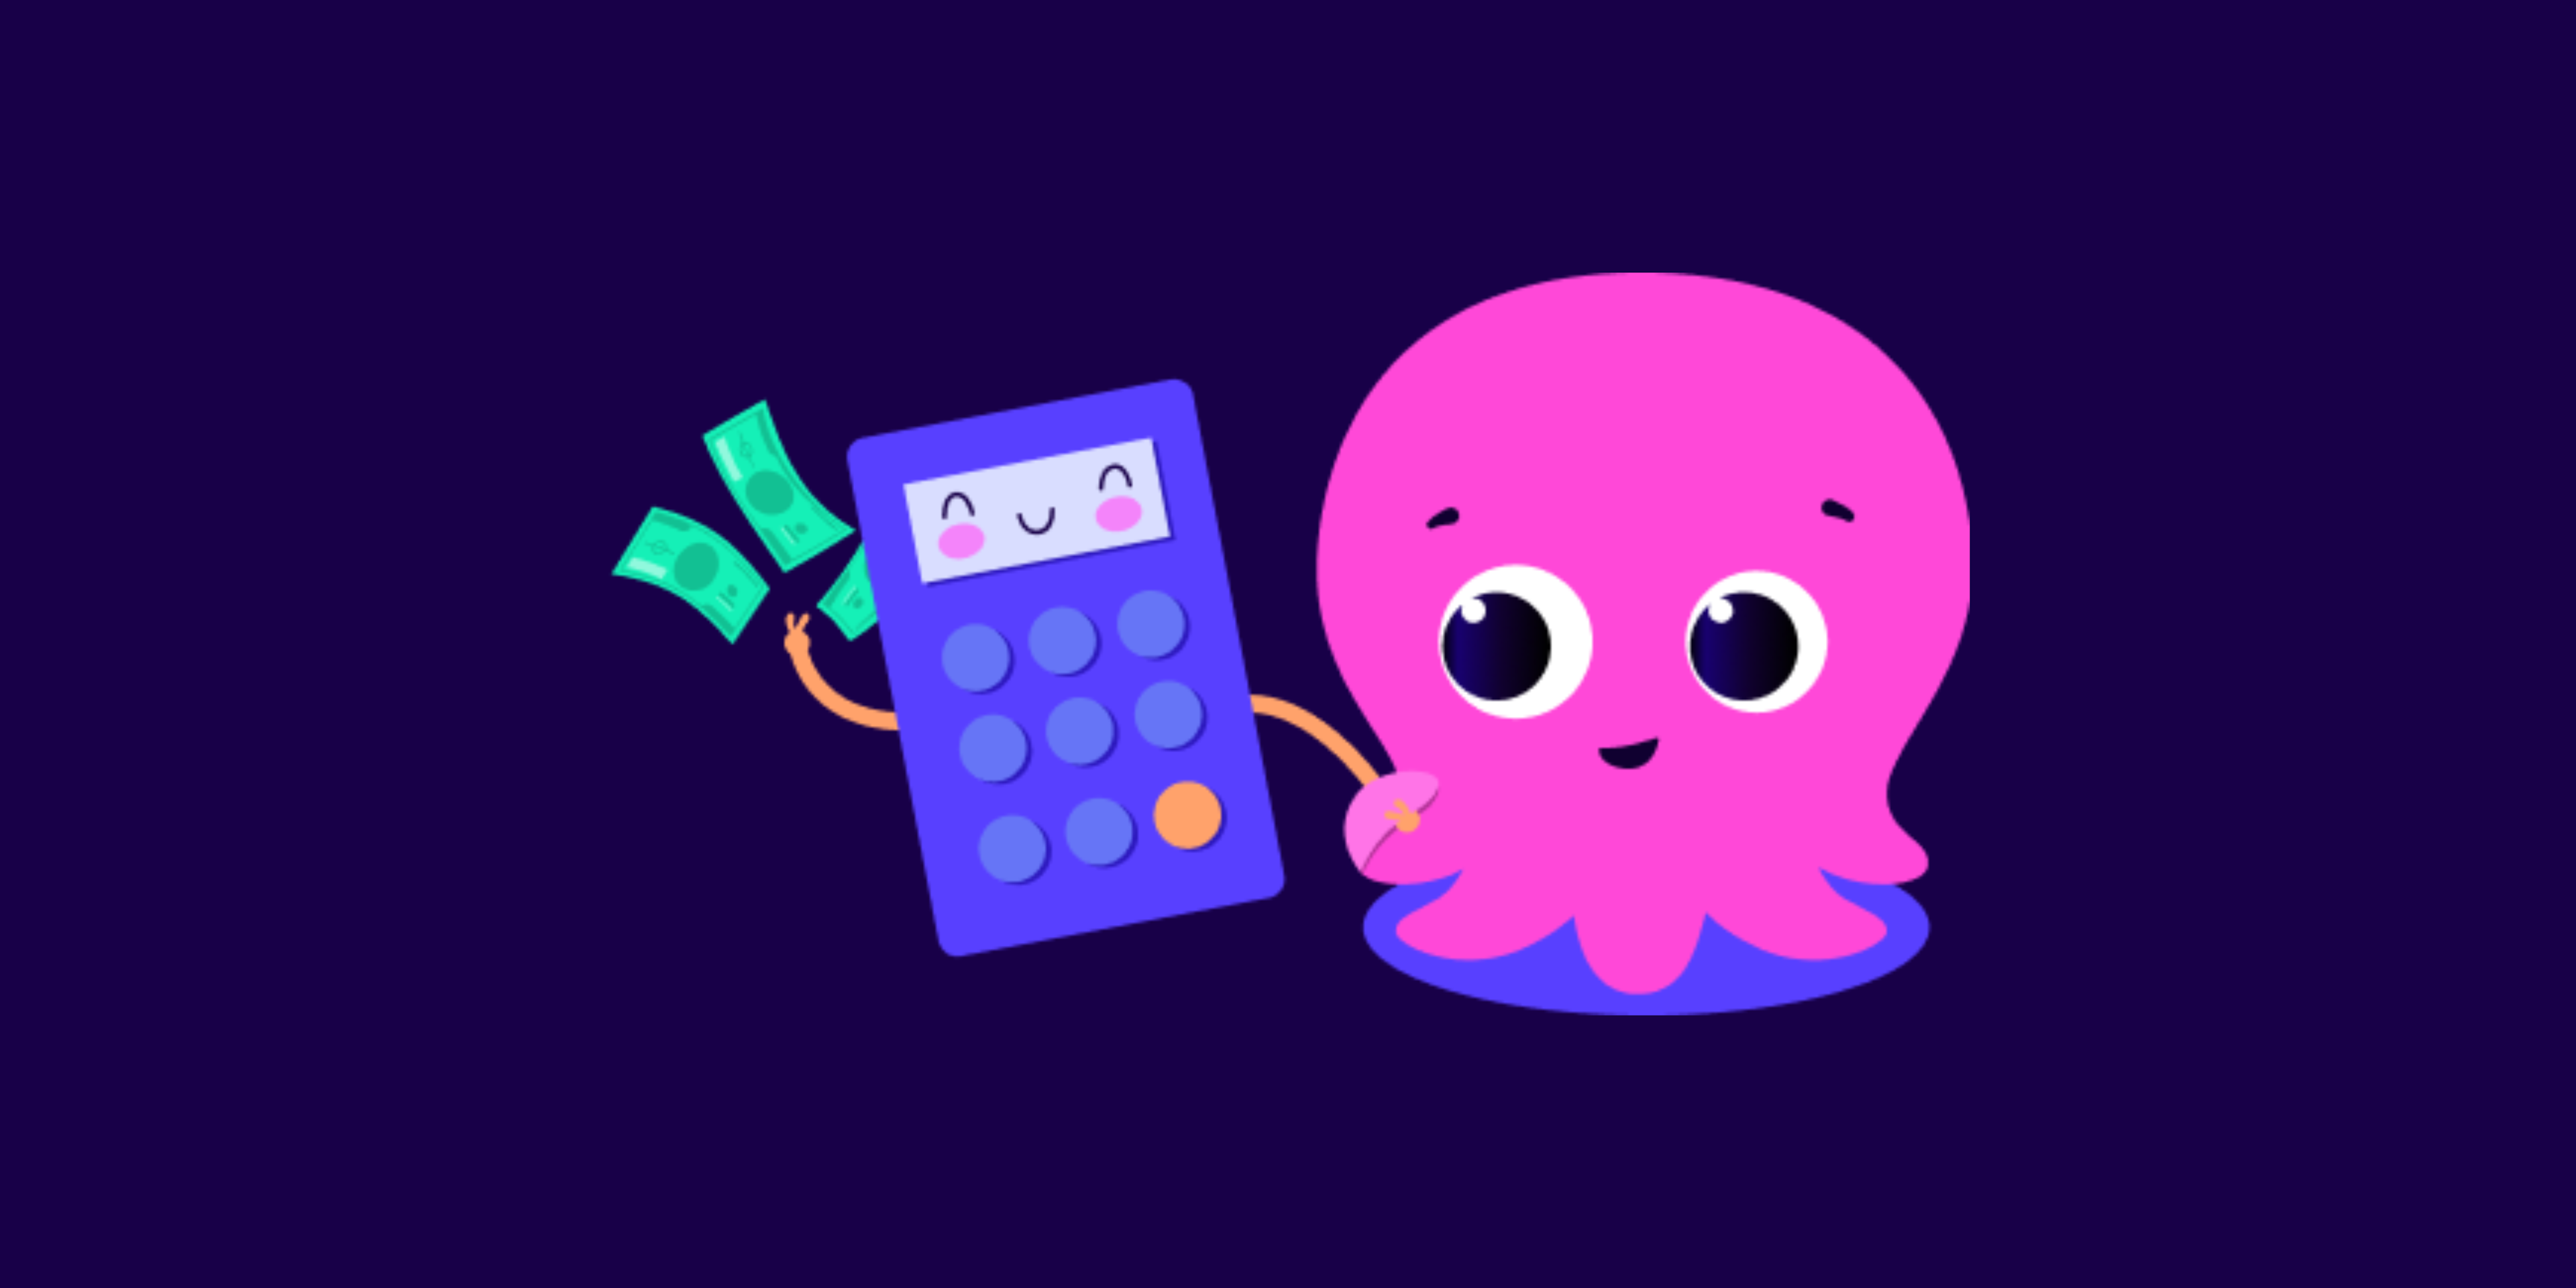 Maximize Your Savings With Intelligent Octopus for Thermostats